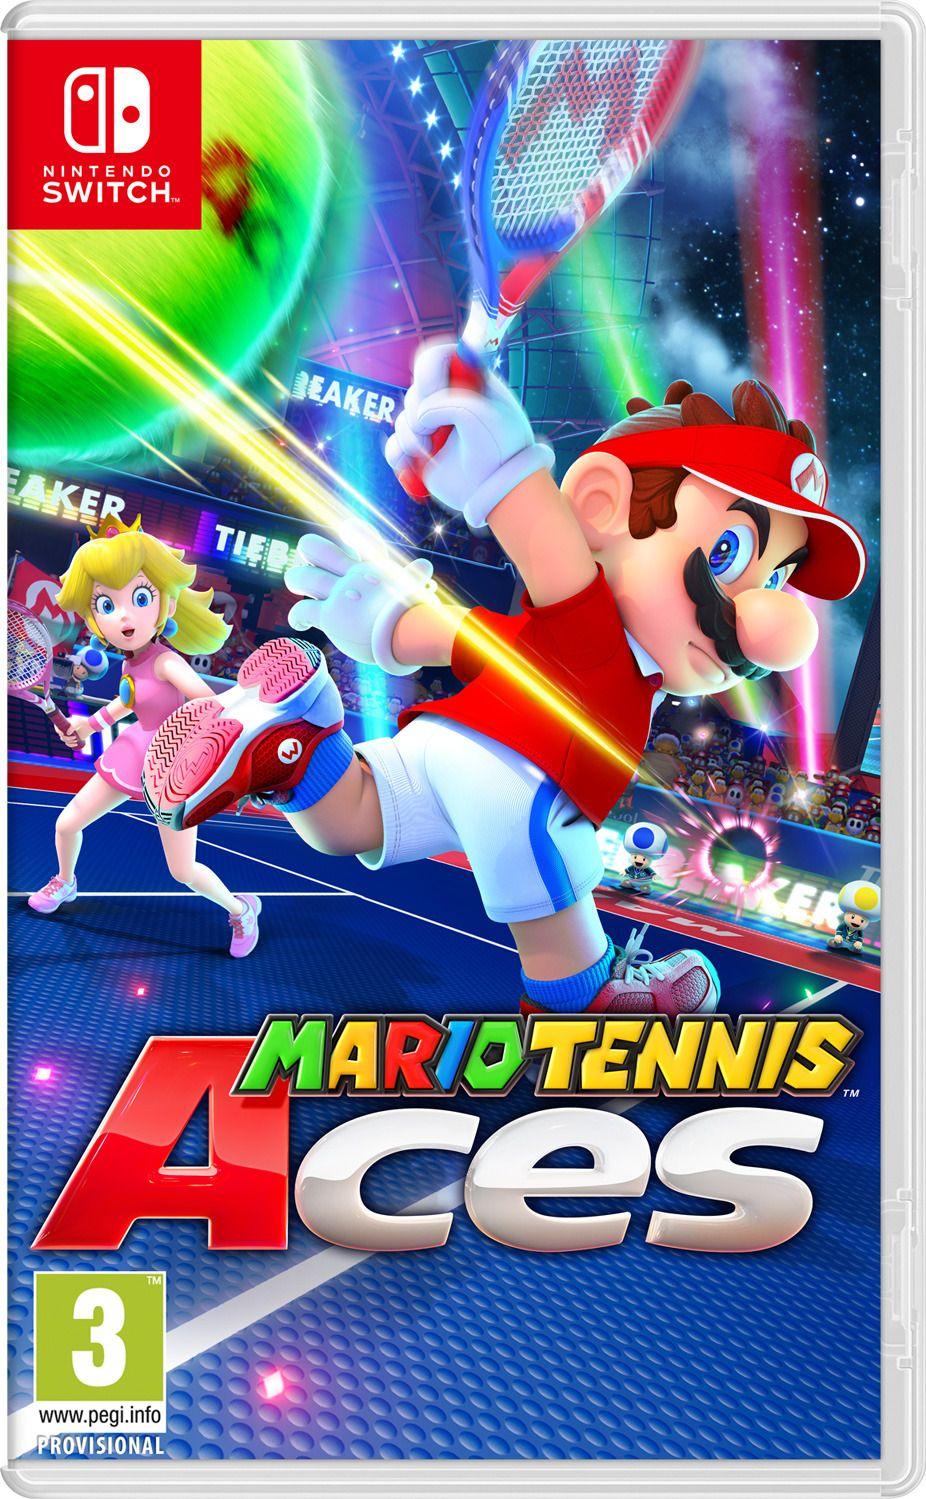 Mario Tennis Aces screenshots, image and picture